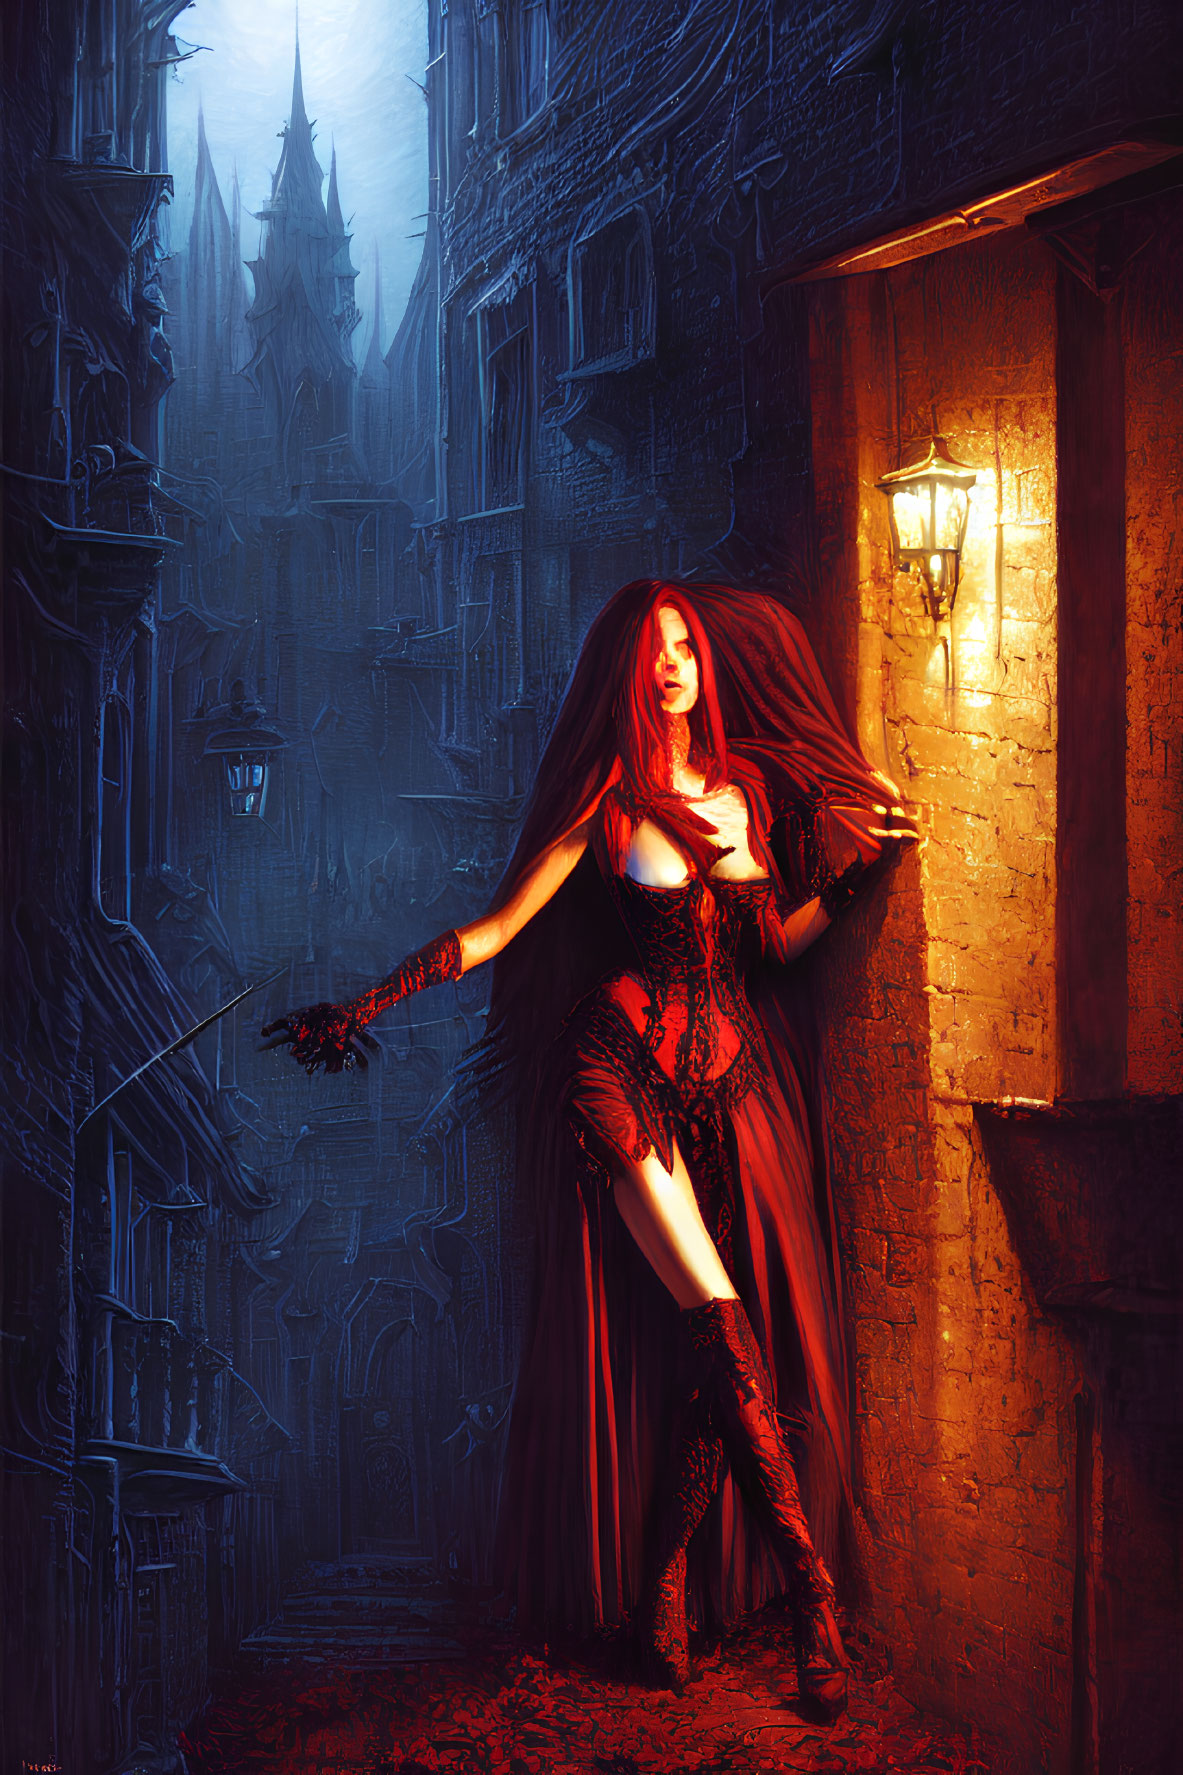 Woman in red gothic dress with lantern in eerie alleyway